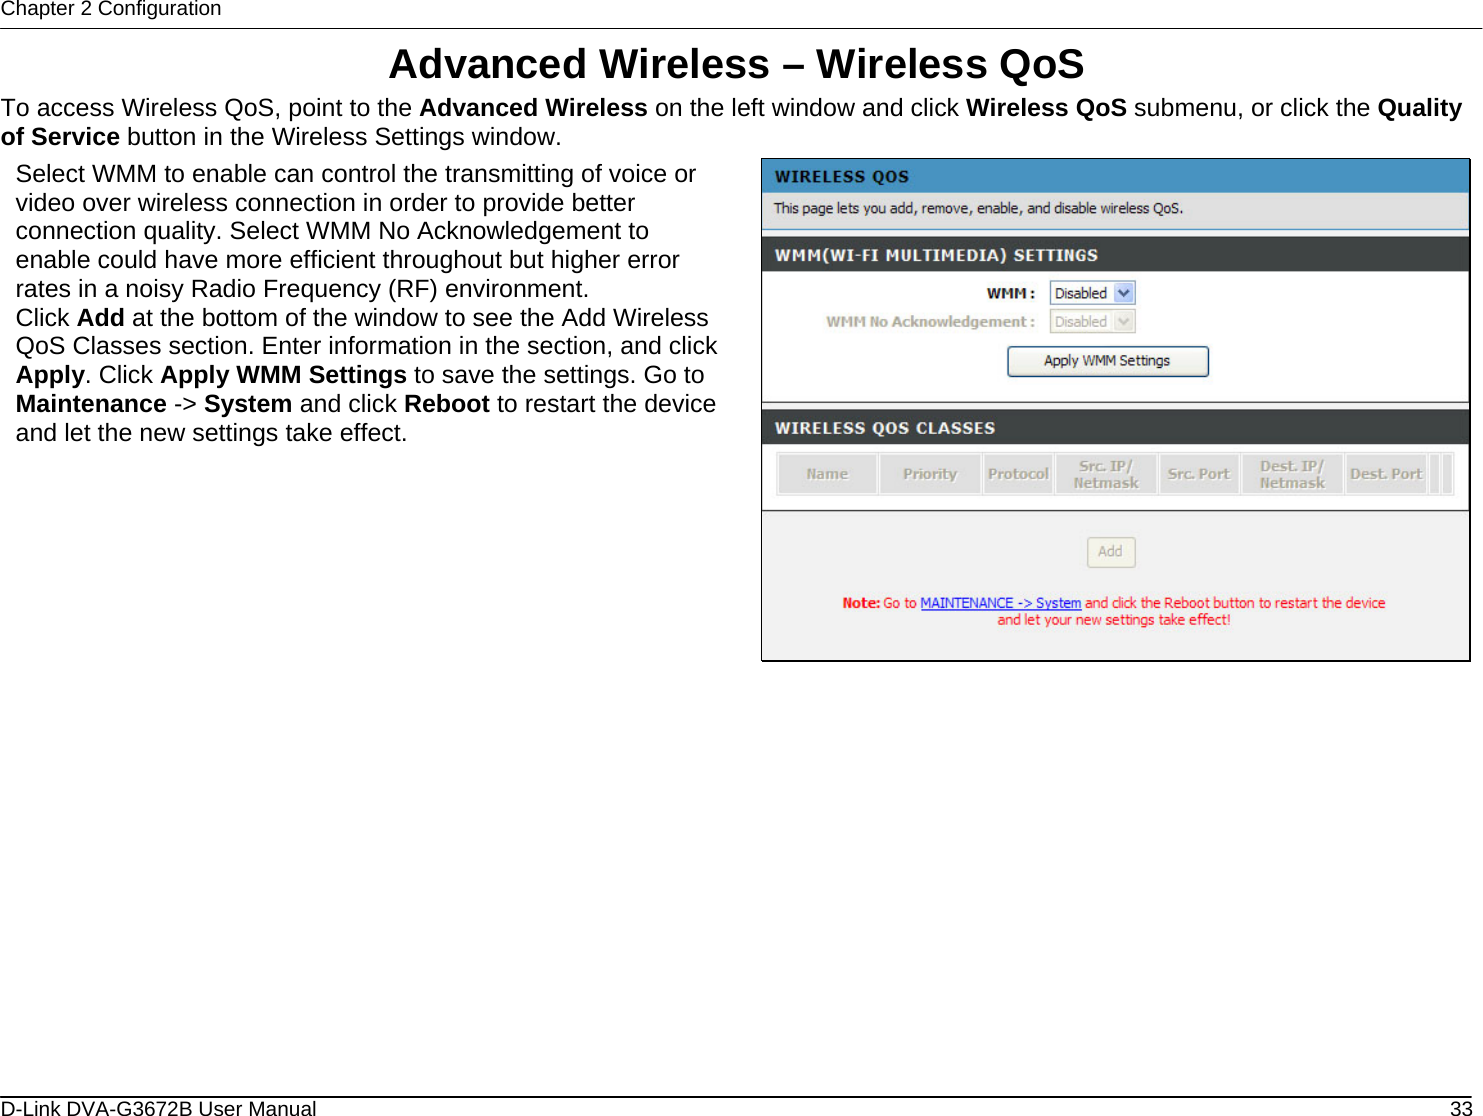 Chapter 2 Configuration Advanced Wireless – Wireless QoS To access Wireless QoS, point to the Advanced Wireless on the left window and click Wireless QoS submenu, or click the Quality of Service button in the Wireless Settings window. Select WMM to enable can control the transmitting of voice or video over wireless connection in order to provide better connection quality. Select WMM No Acknowledgement to enable could have more efficient throughout but higher error rates in a noisy Radio Frequency (RF) environment. Click Add at the bottom of the window to see the Add Wireless QoS Classes section. Enter information in the section, and click Apply. Click Apply WMM Settings to save the settings. Go to Maintenance -&gt; System and click Reboot to restart the device and let the new settings take effect.                D-Link DVA-G3672B User Manual  33